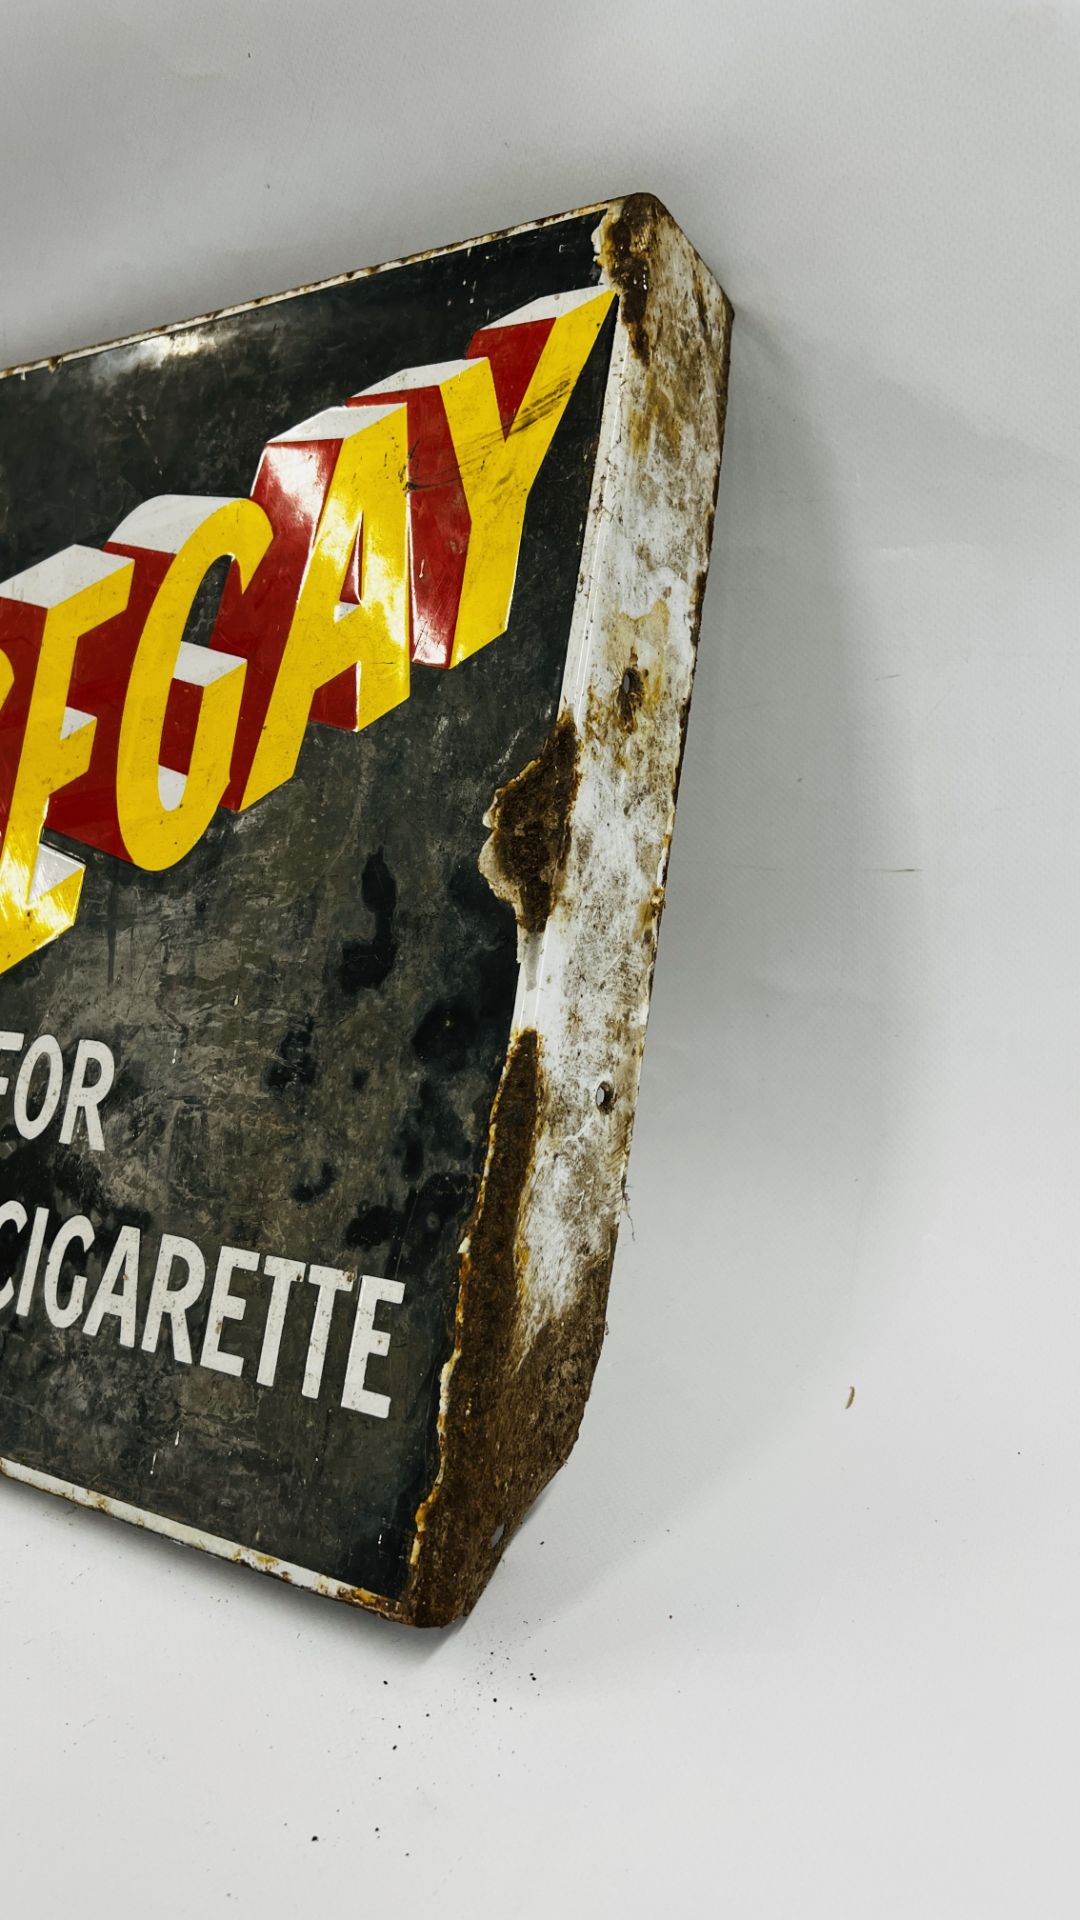 AN ORIGINAL VINTAGE ENAMEL DOUBLE SIDED SIGN "NOSEGAY" SPECIAL FOR PIPE OR CIGARETTE - W 45. - Image 8 of 12